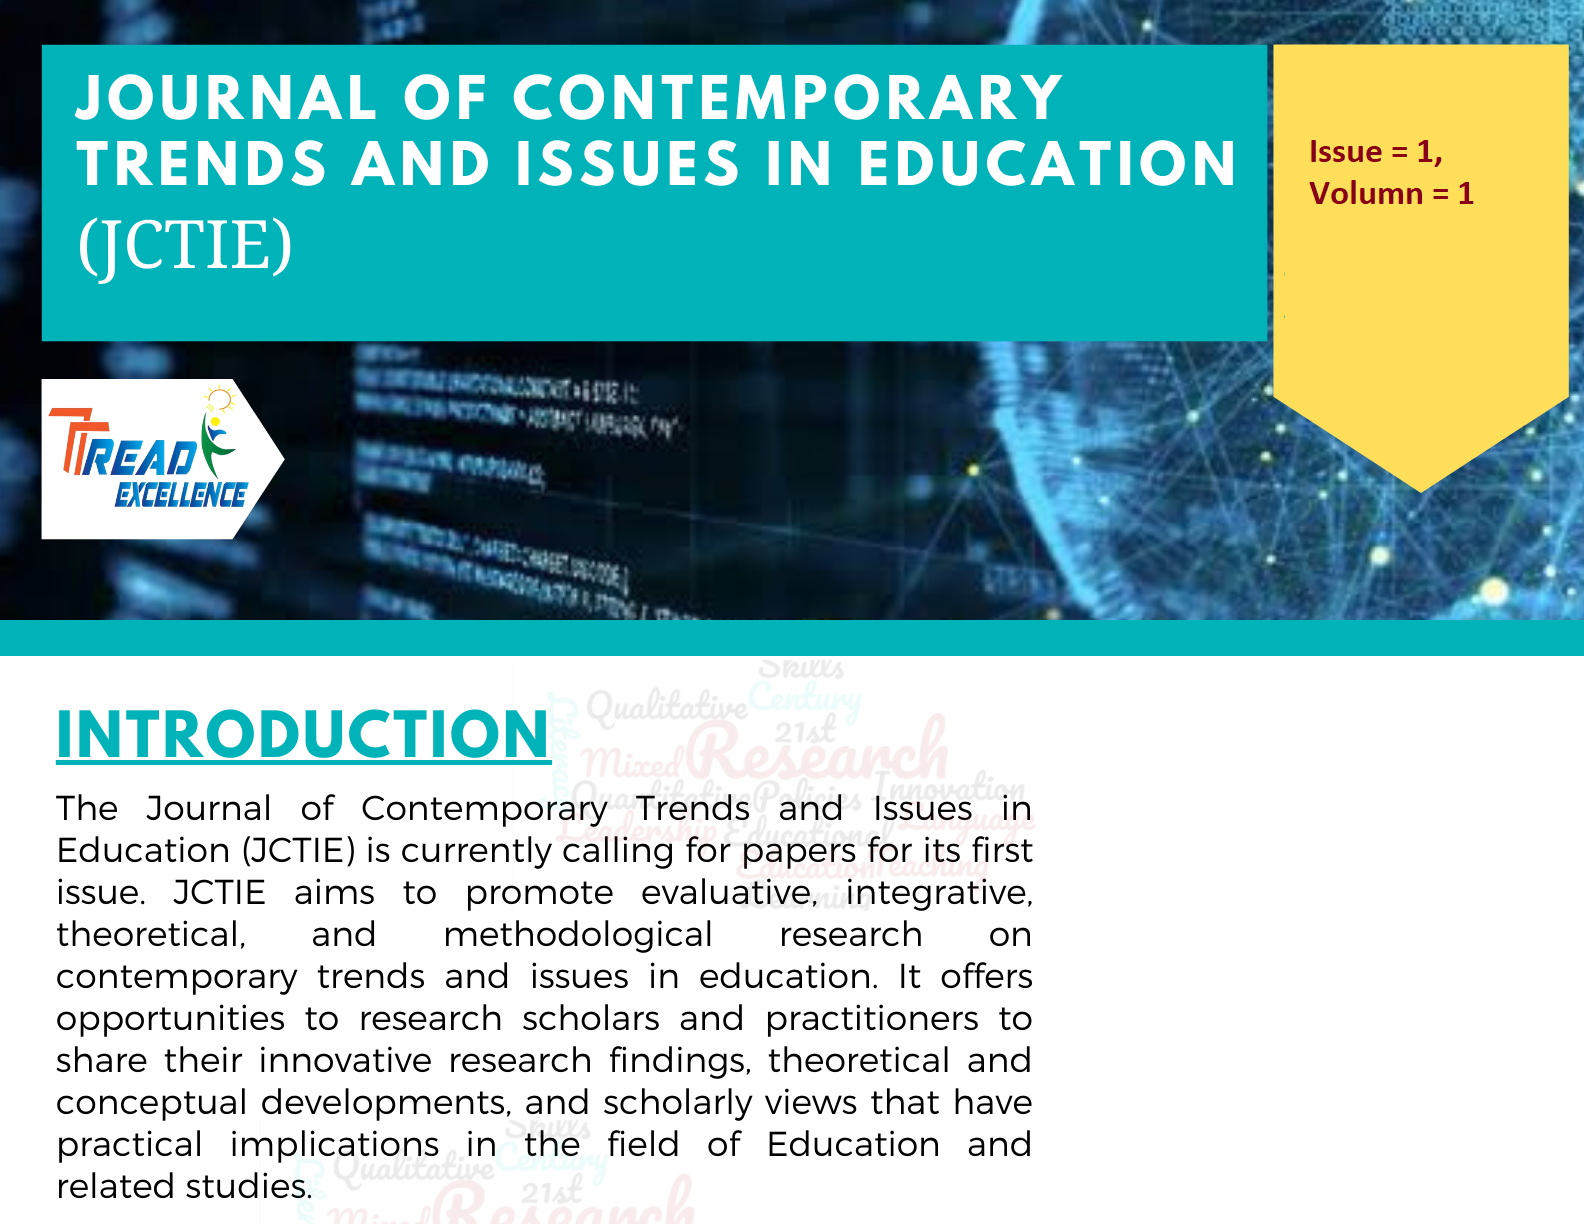 Journal of Contemporary Trends and Issues in Education